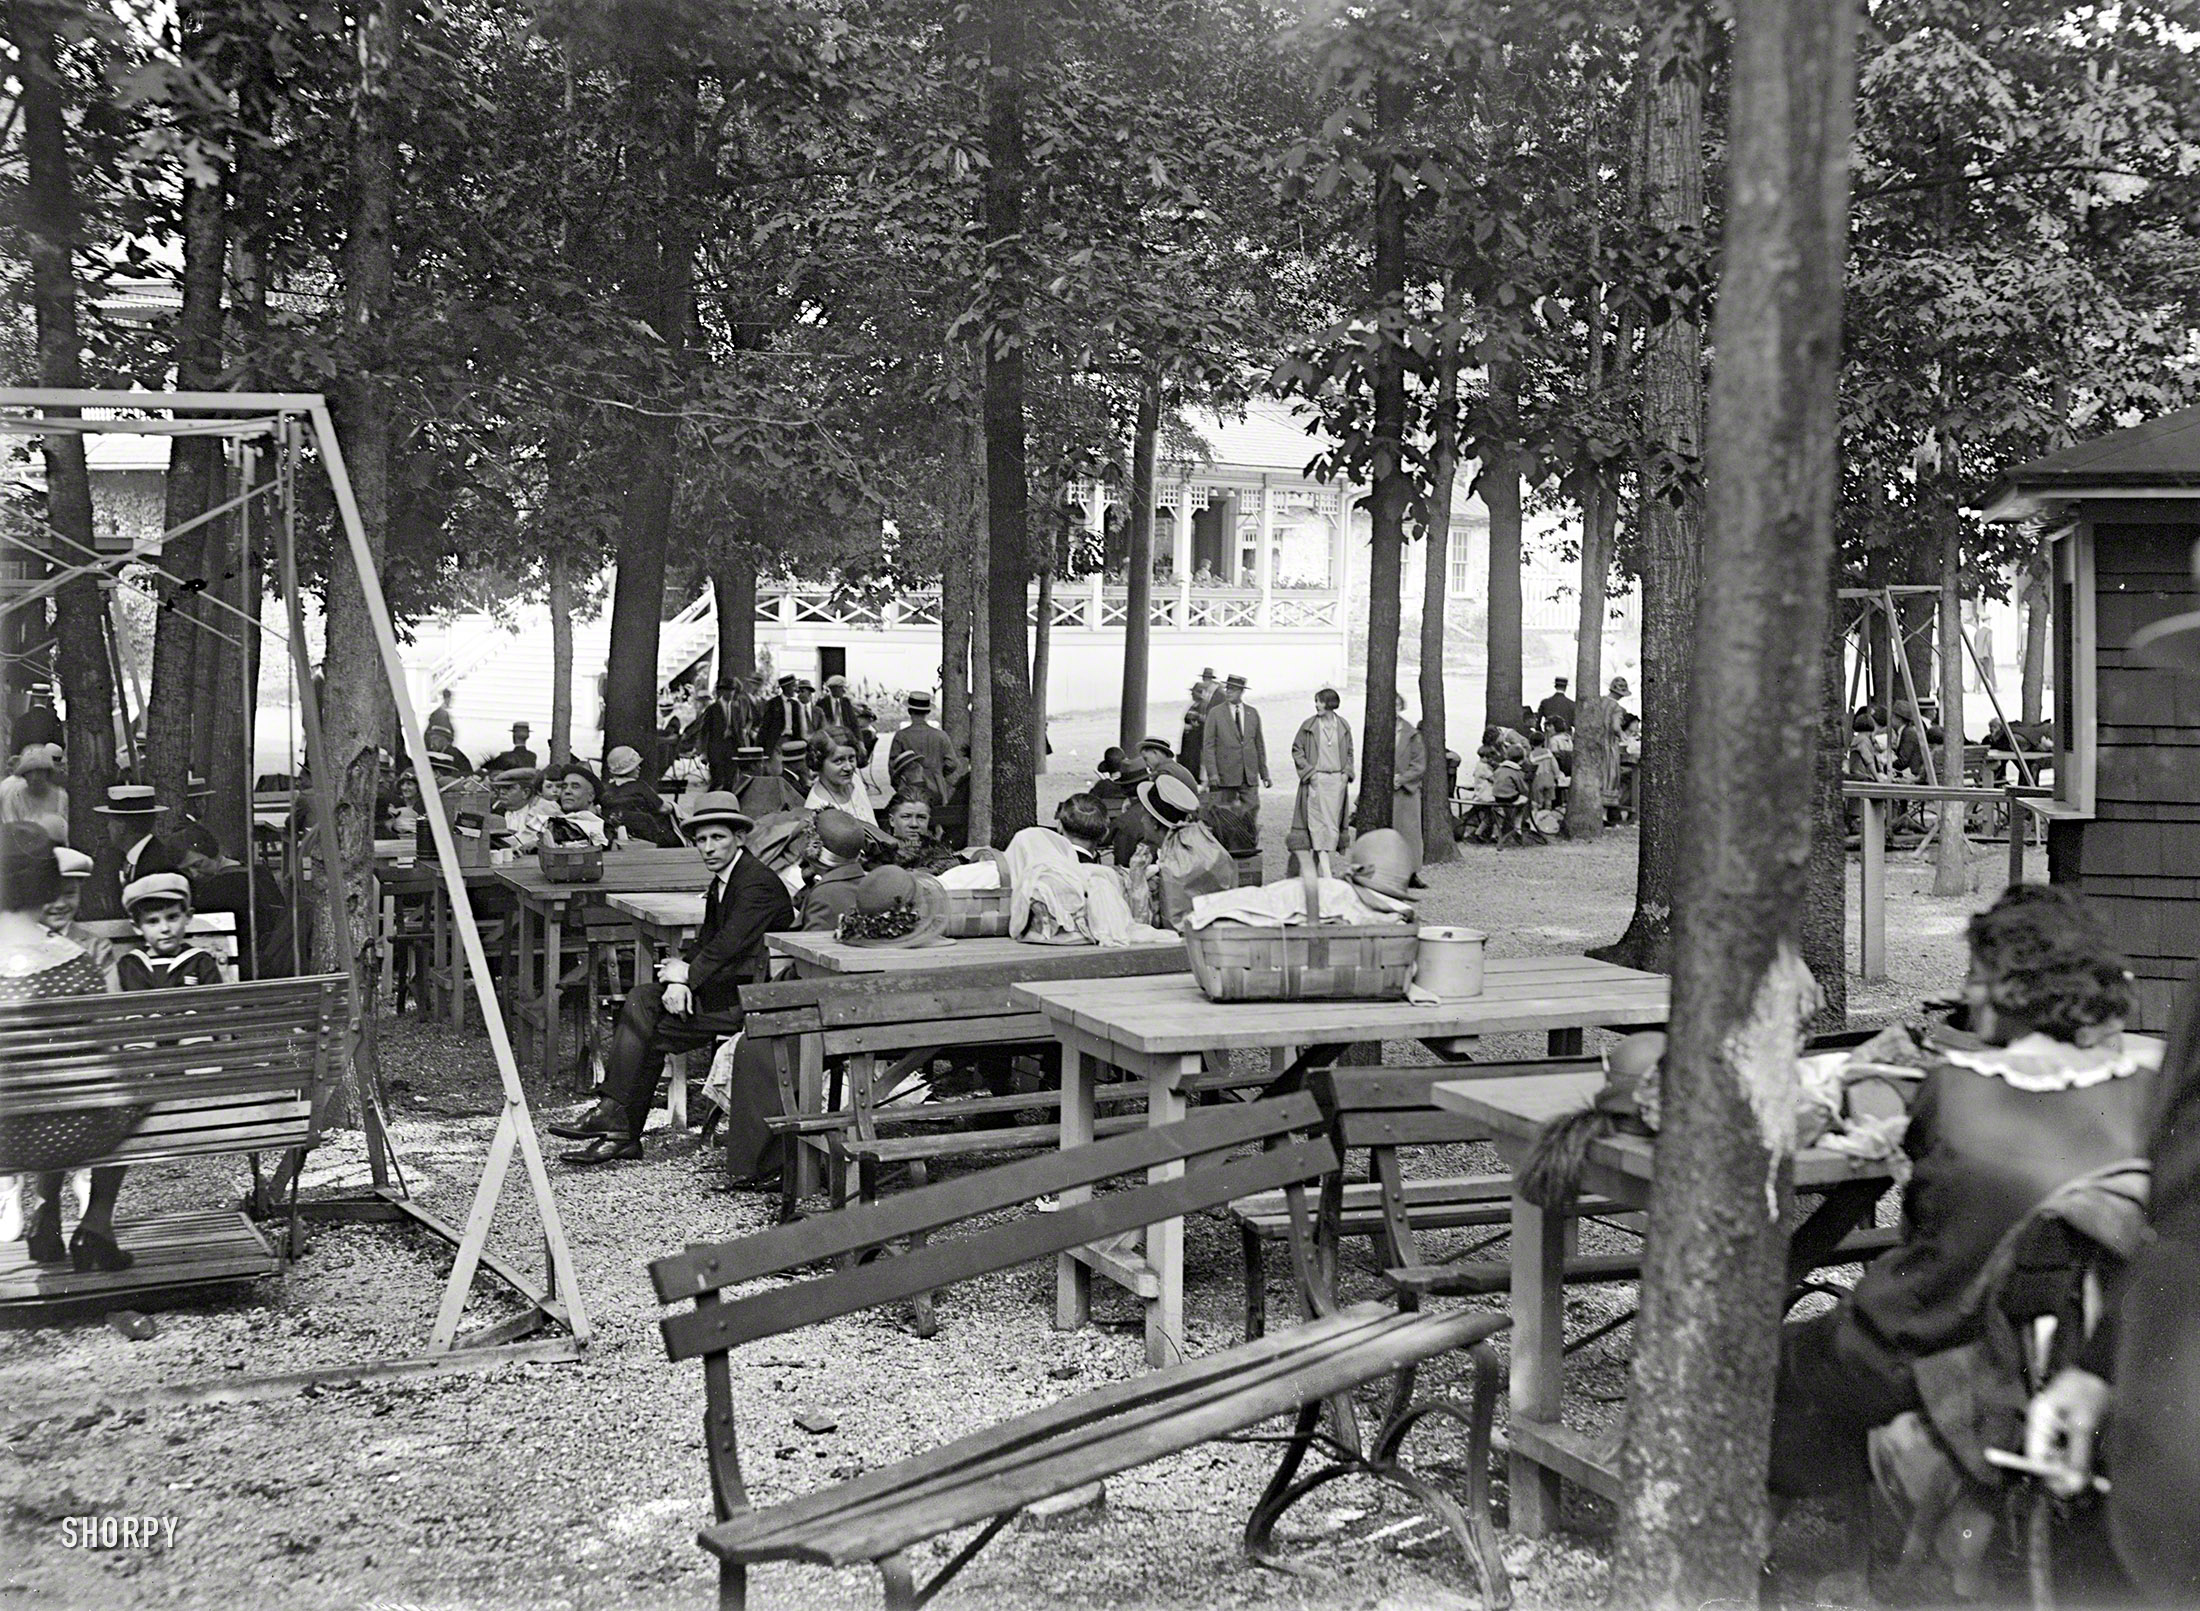 1925. "Glen Echo Park Co." Picnic tables at the Montgomery County, Maryland, amusement park. National Photo Company glass negative. View full size.